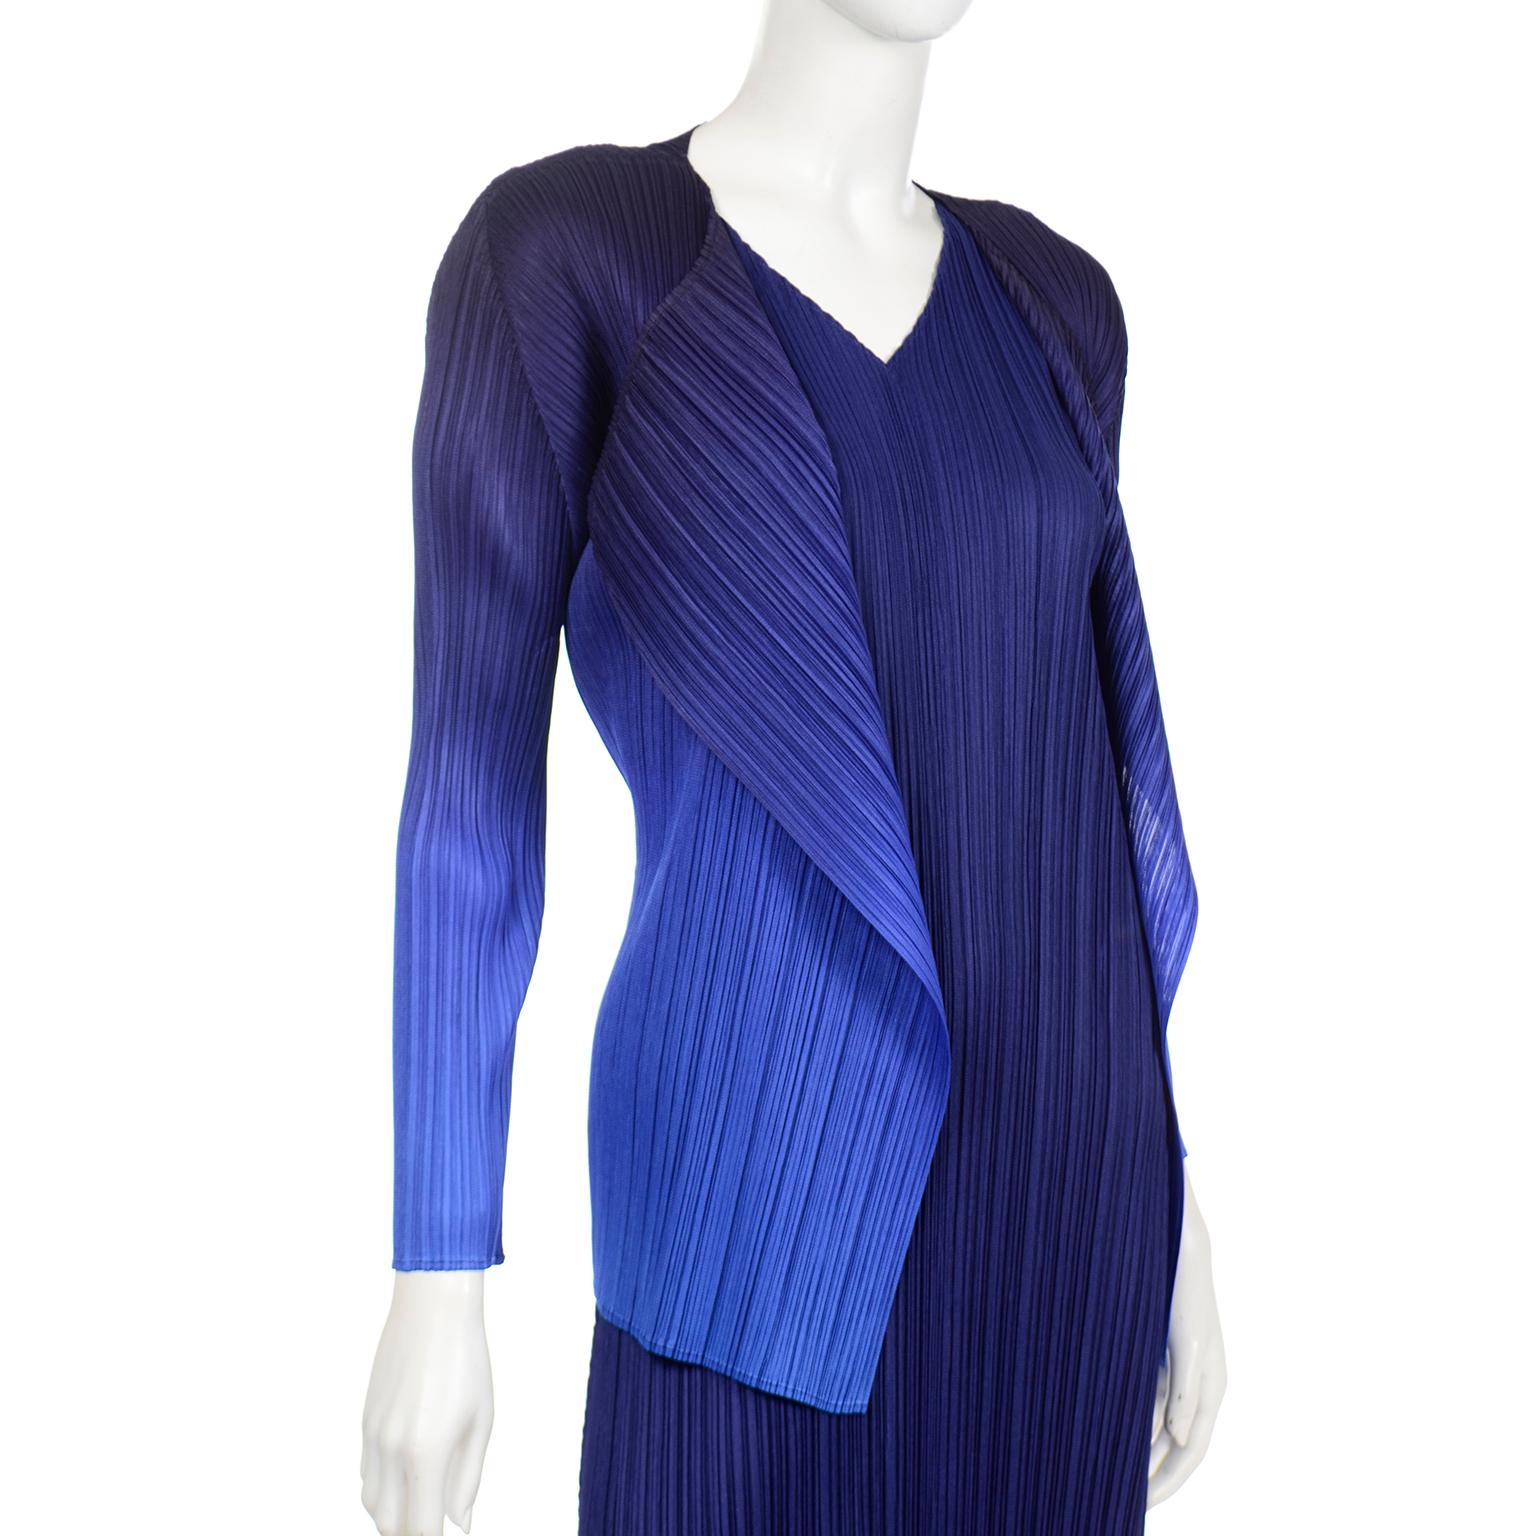 Issey Miyake Pleats Please Blue Dress & Ombre Jacket Outfit 4